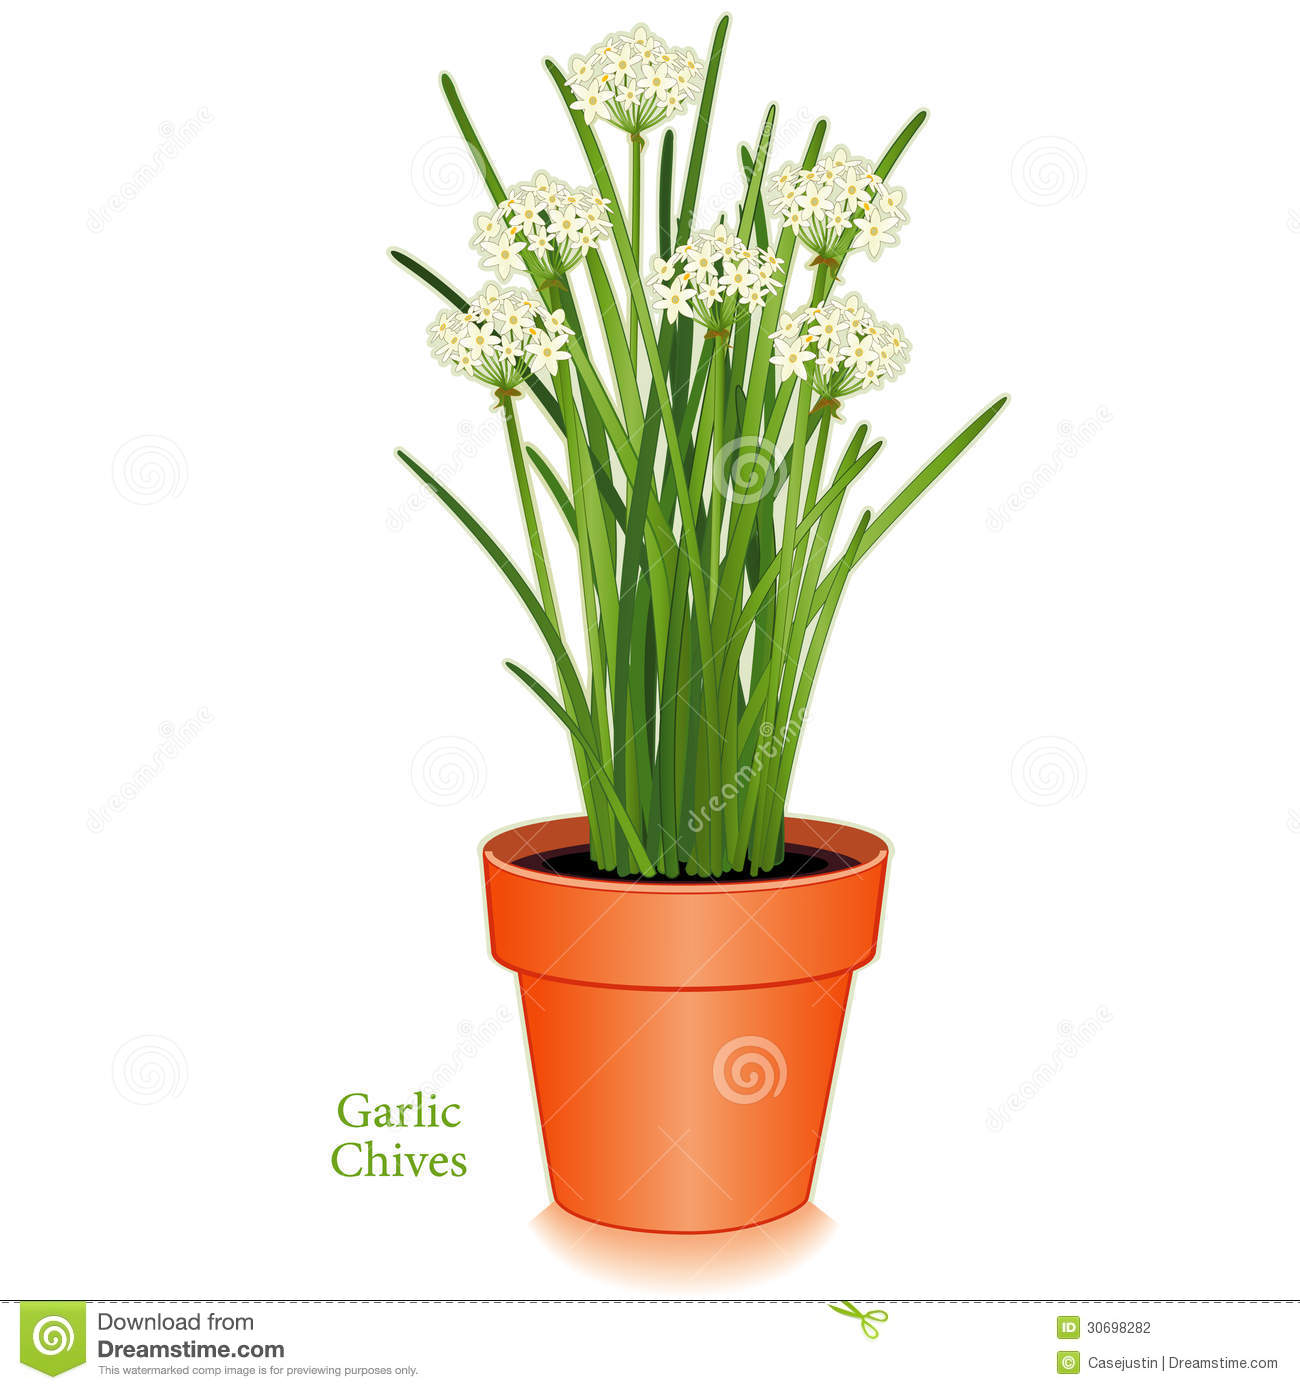 Garlic Chives In Clay Flower Pot Aromatic Herb With White Flowers    